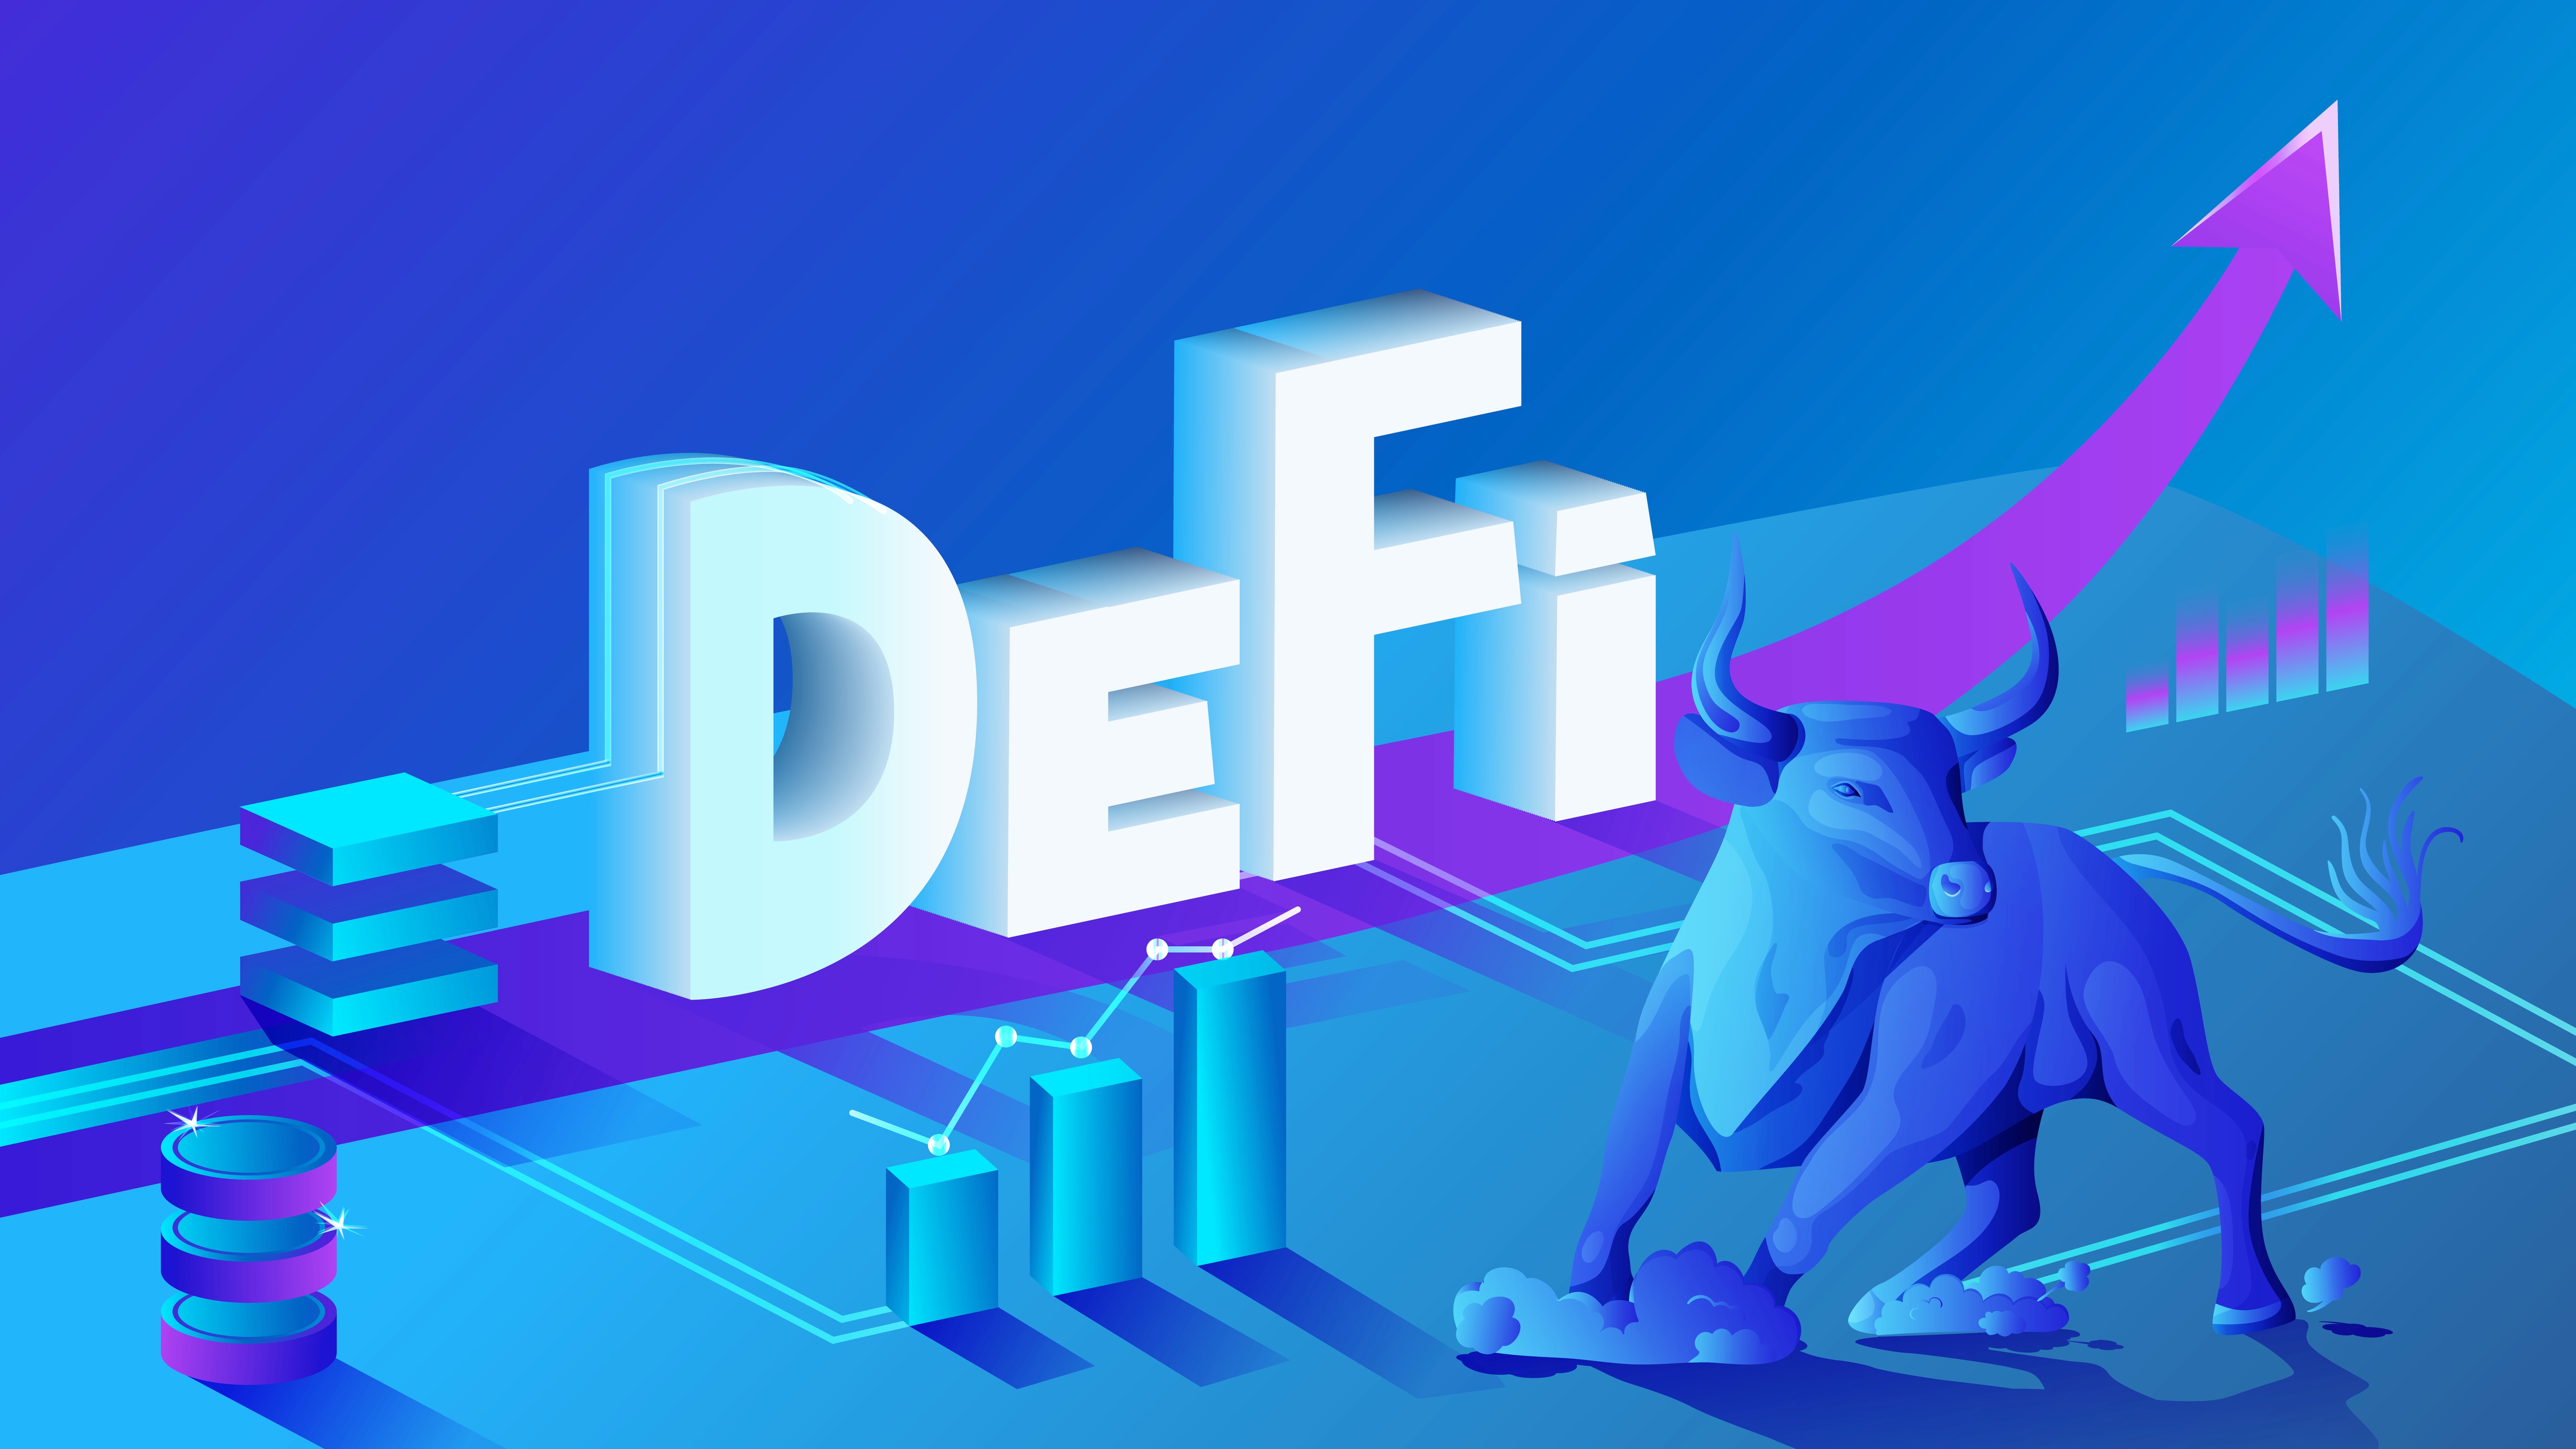 Vector illustration isometric composition of cryptocurrency and blockchain with decentralized finance defi and bull.